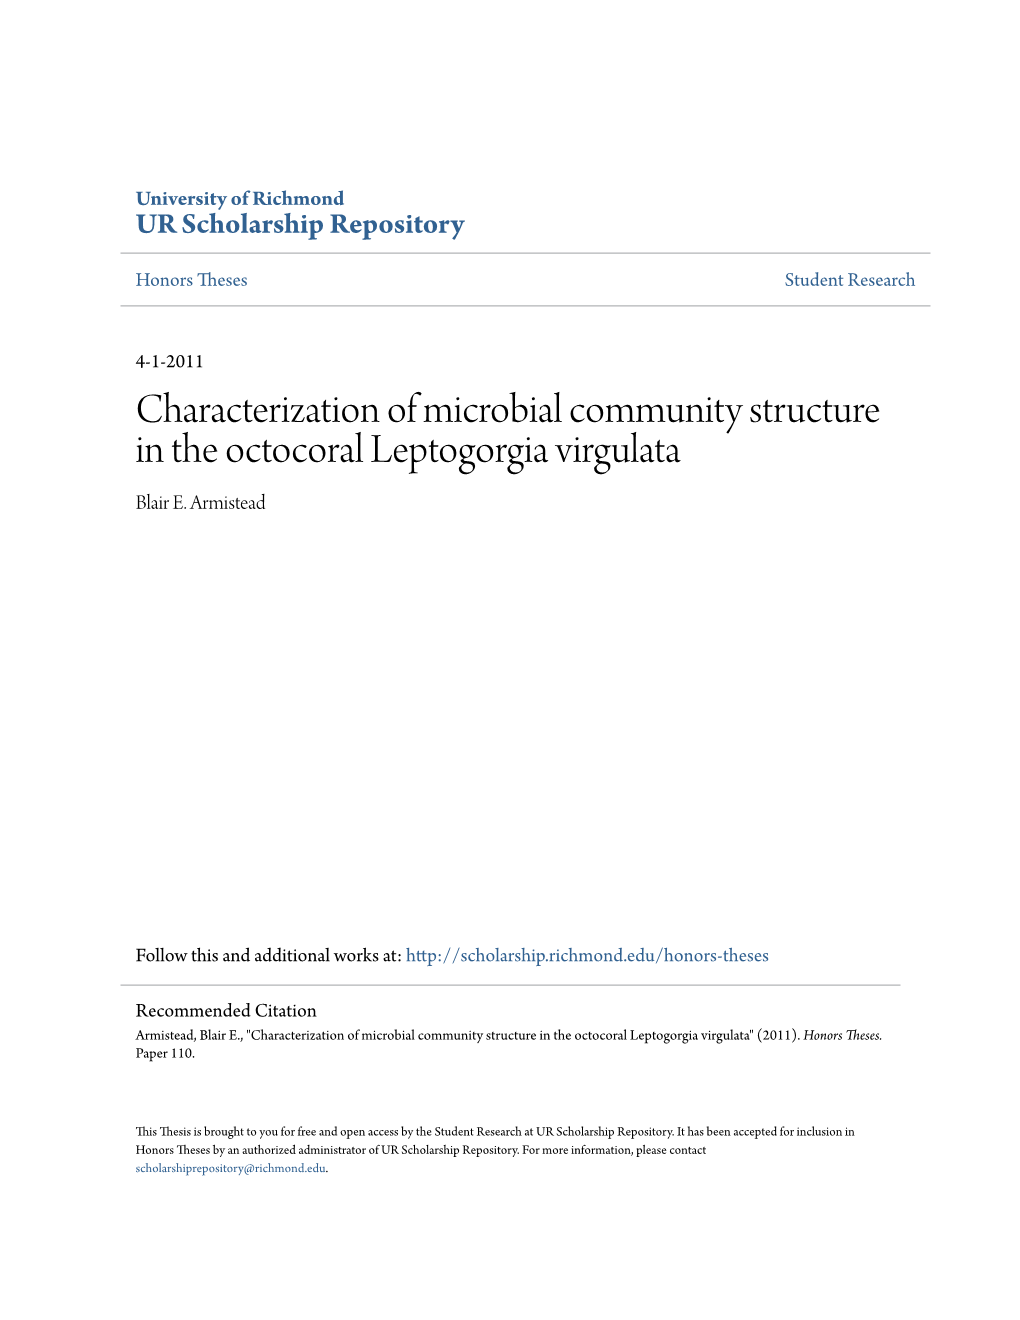 Characterization of Microbial Community Structure in the Octocoral Leptogorgia Virgulata Blair E